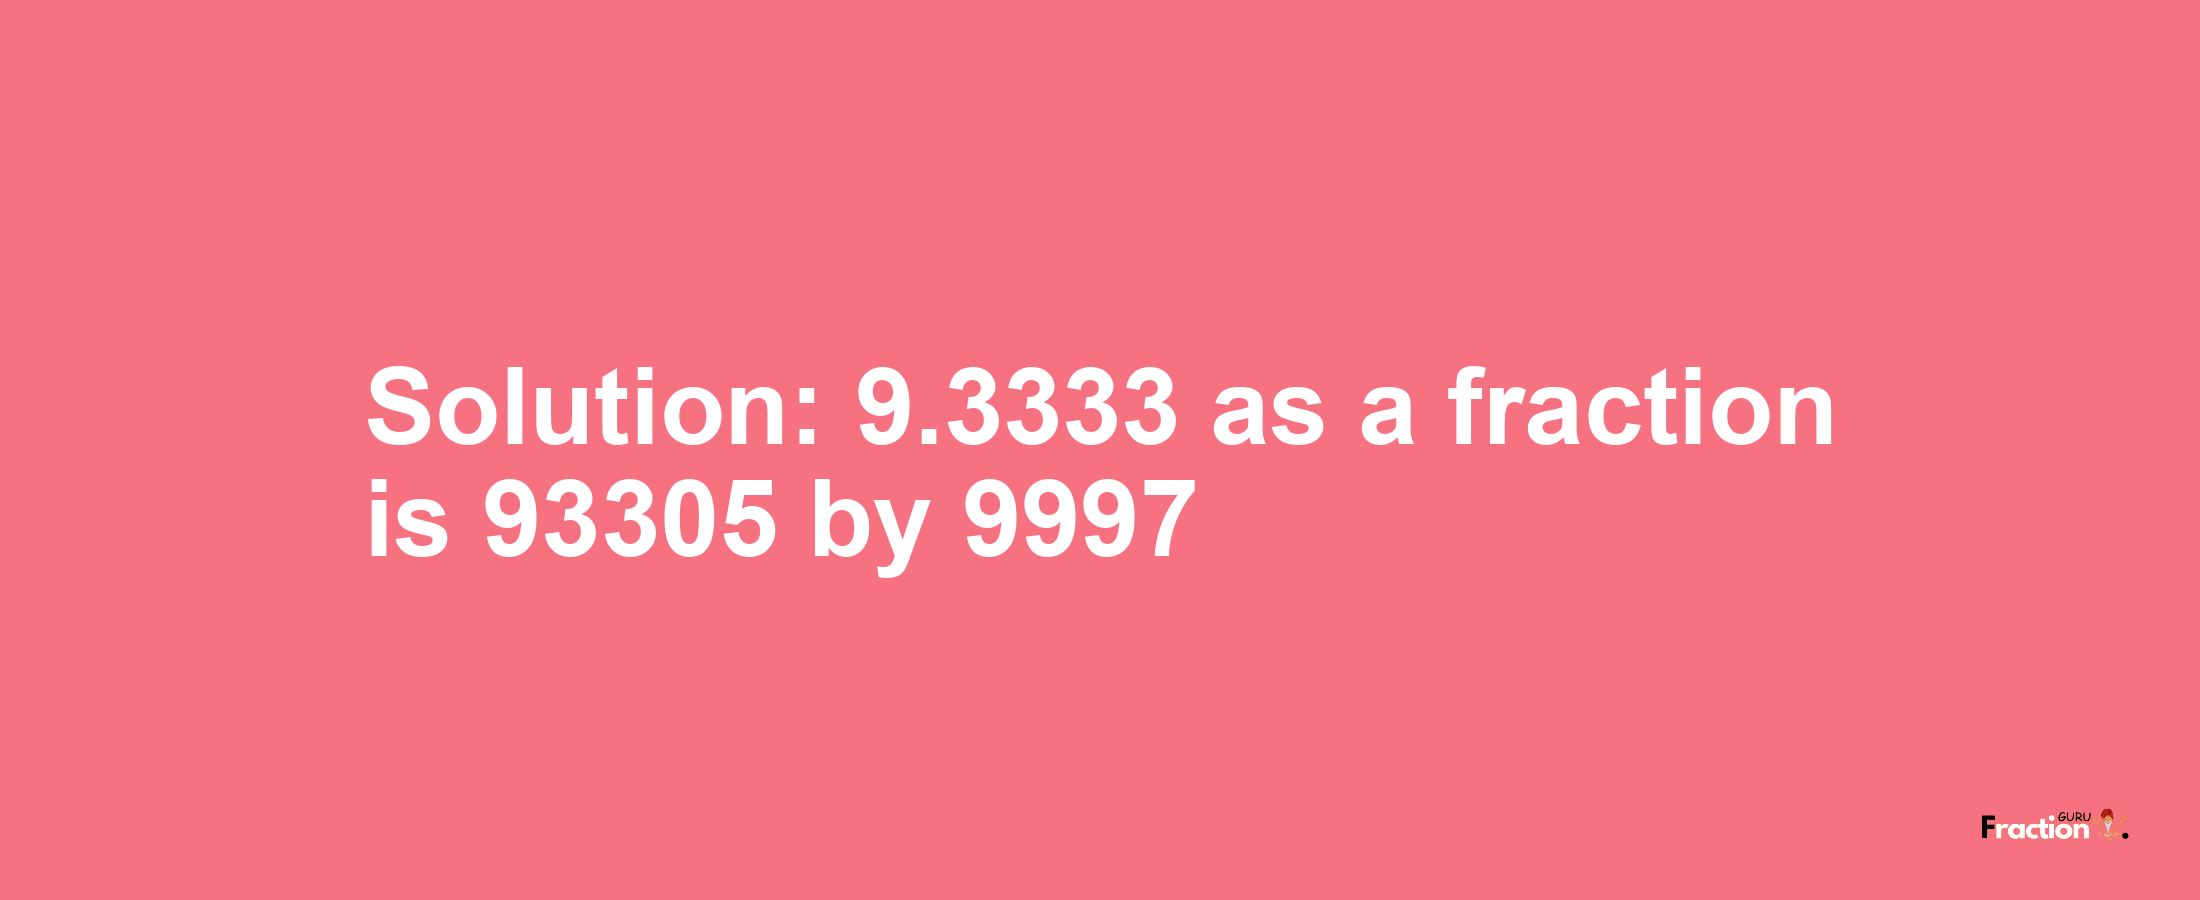 Solution:9.3333 as a fraction is 93305/9997